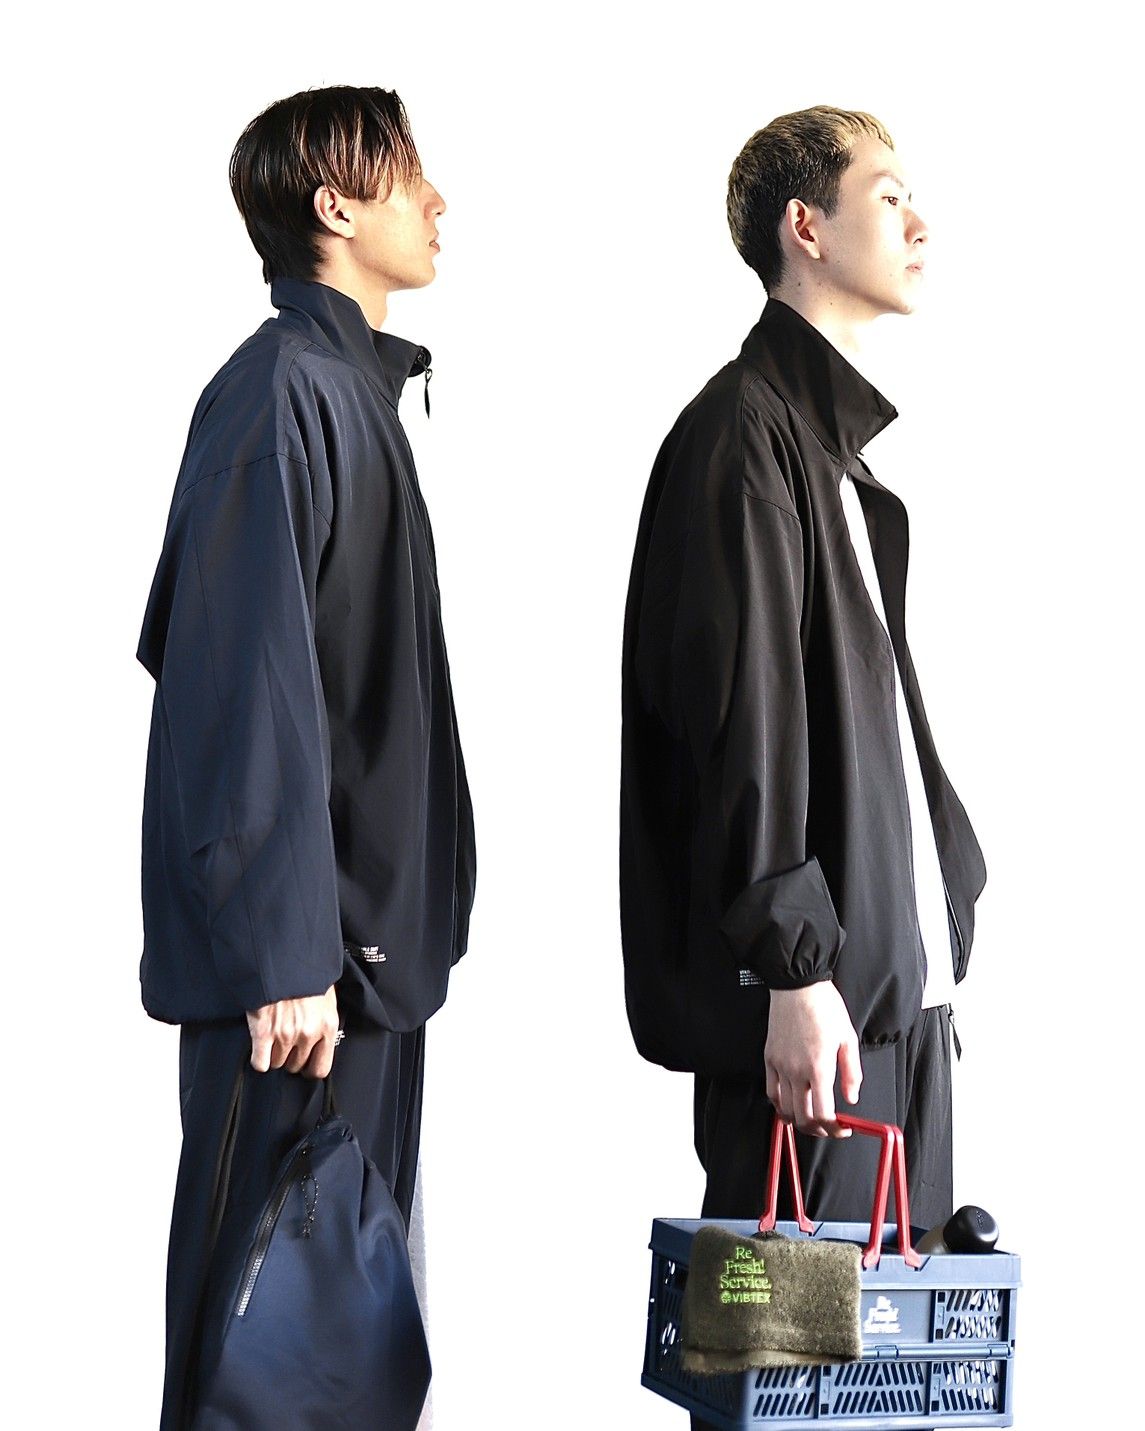 ReFresh!Service. 24SS “UTILITY PACKABLE SUIT”(FSR241-60155)NAVY☆4月13日(土)再販！  - M